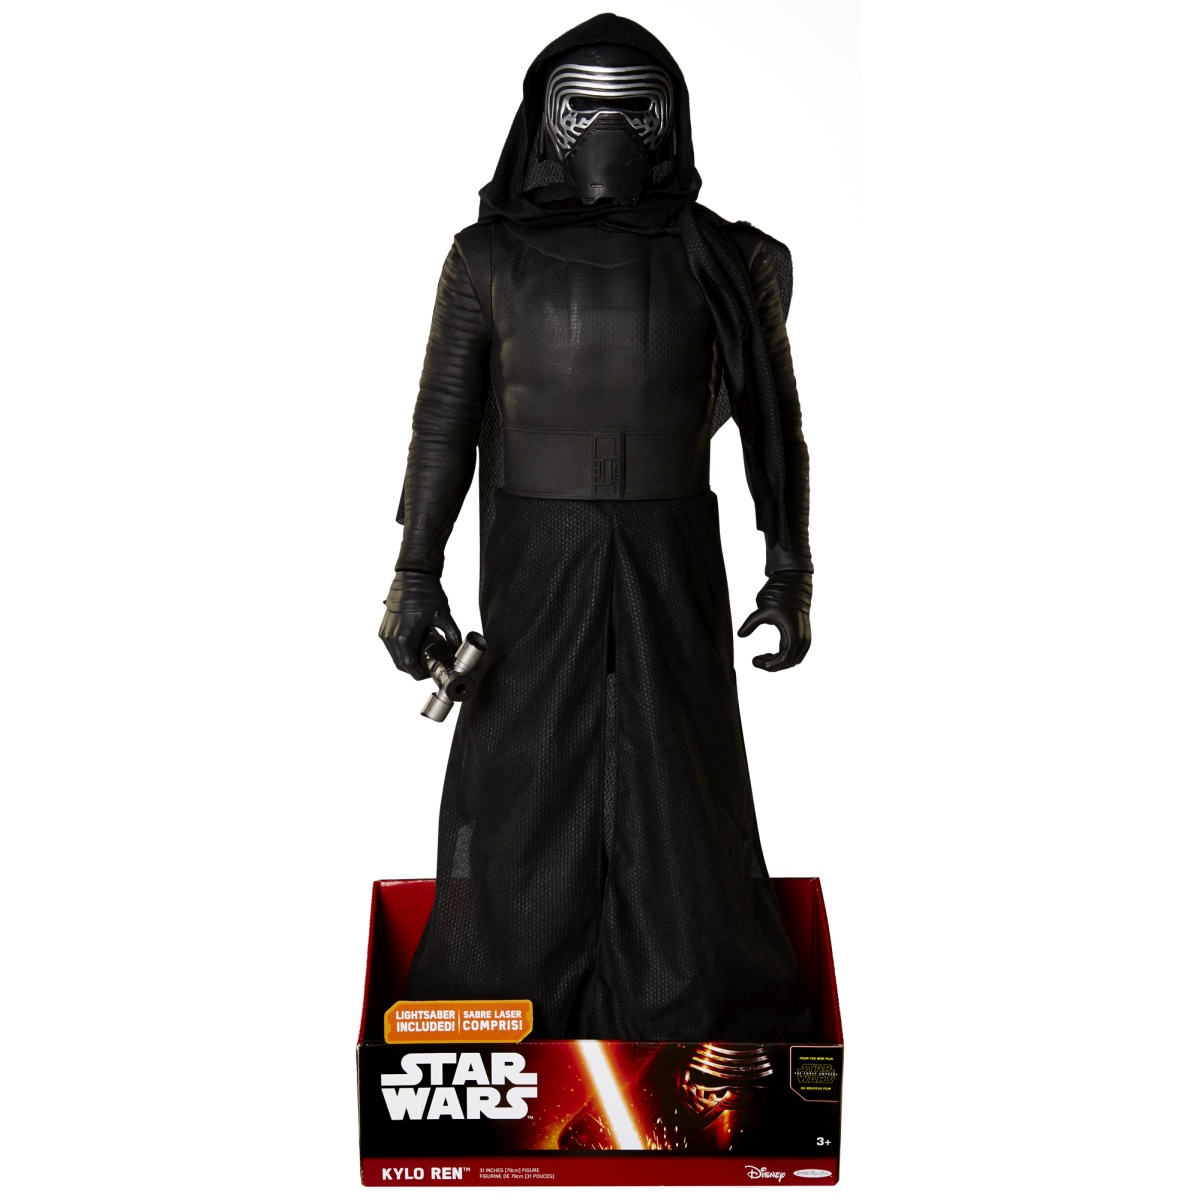 31″ Action Figures Only $19.99! (WWE, Star Wars, Batman, and Power Rangers)